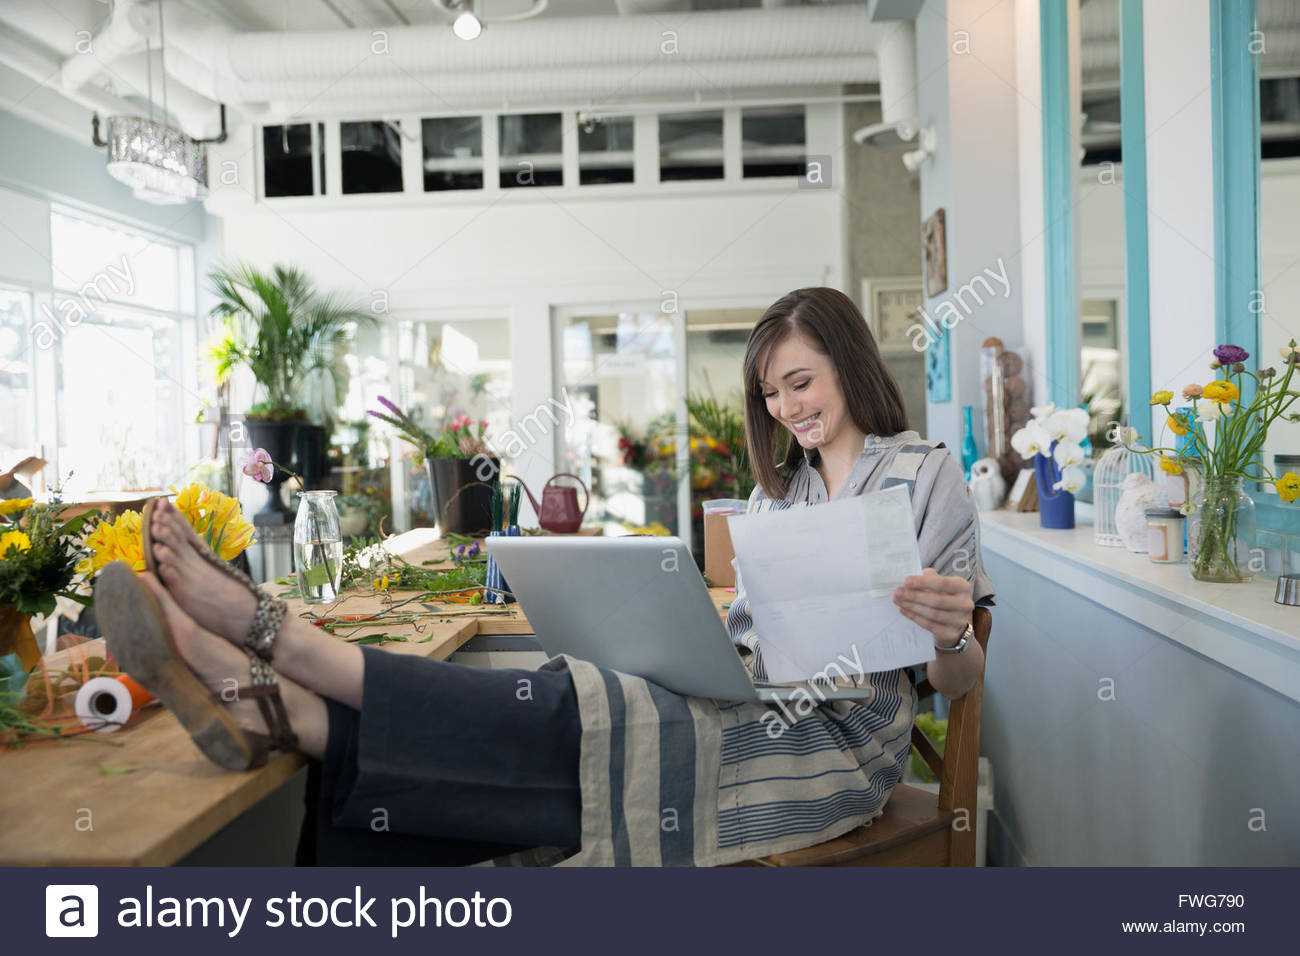 Florist using a laptop with feet up Stock Photo